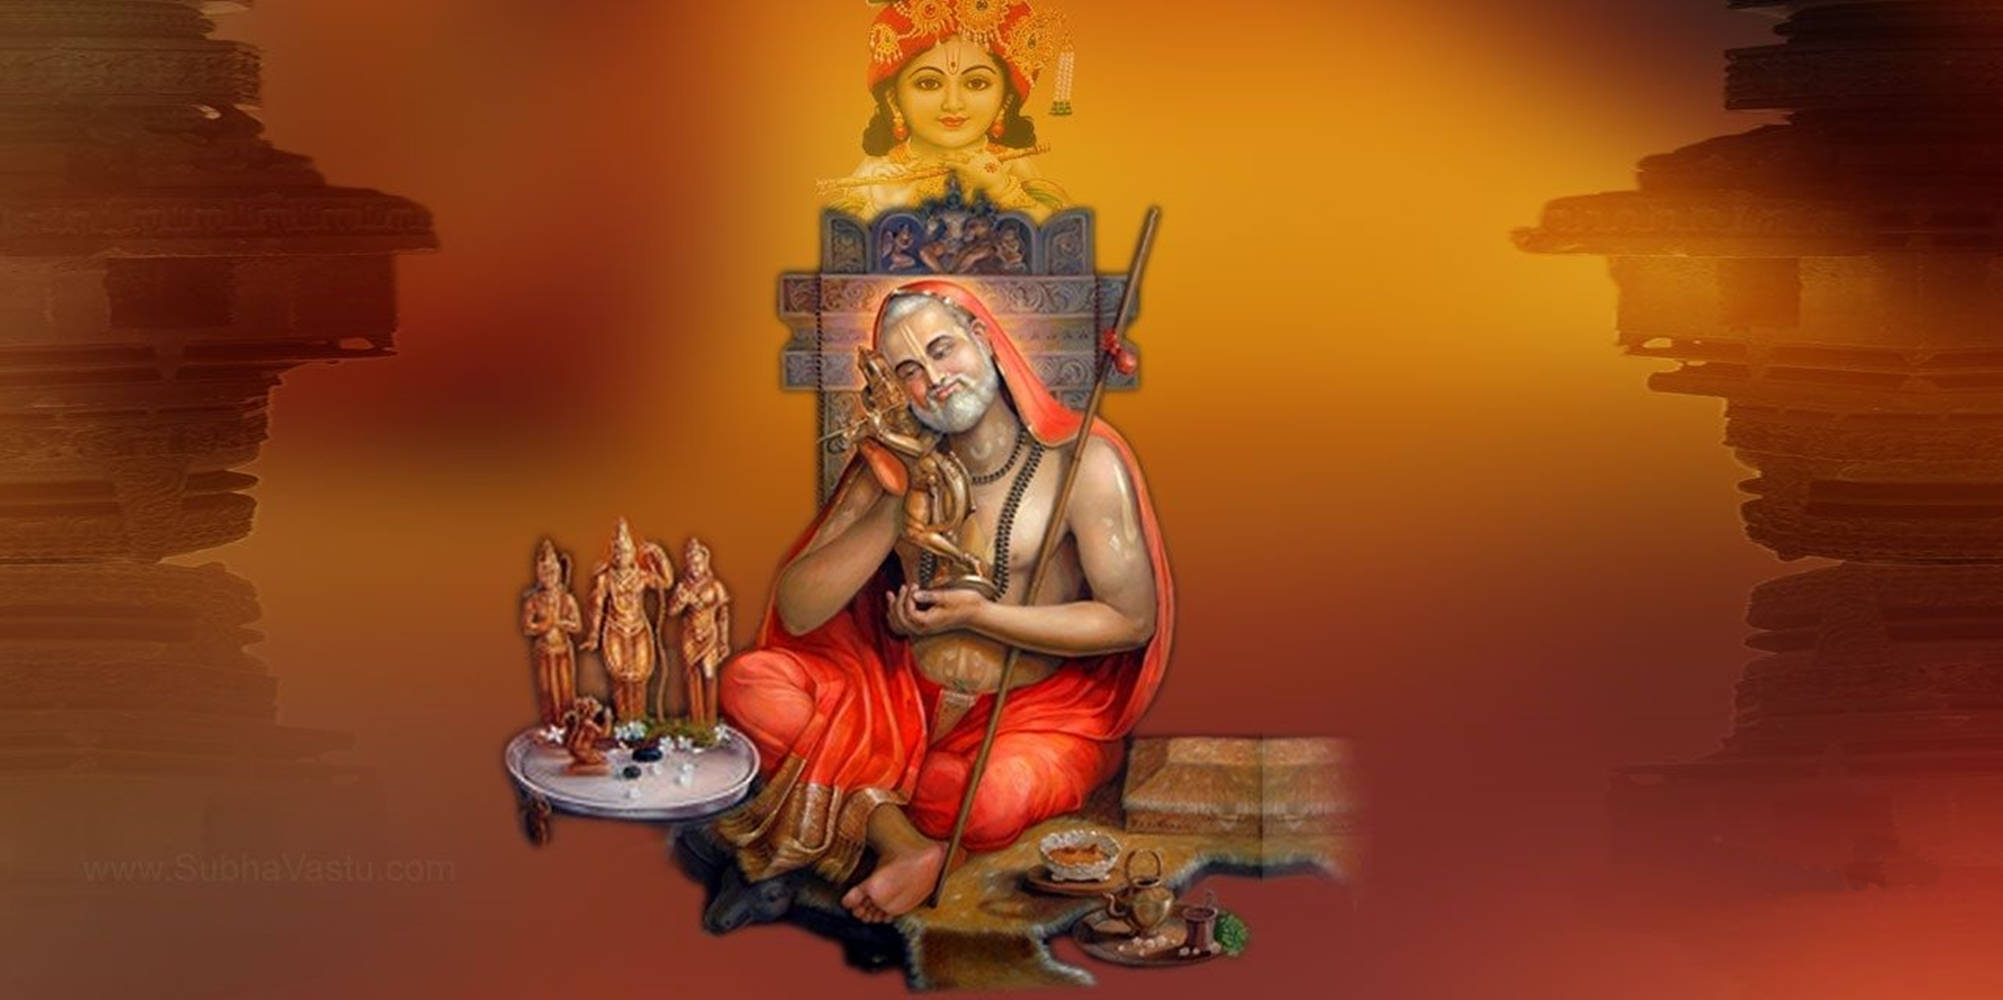 Serene Divine Scene - Lord Raghavendra Surrounded By Sacred Indian Statues.